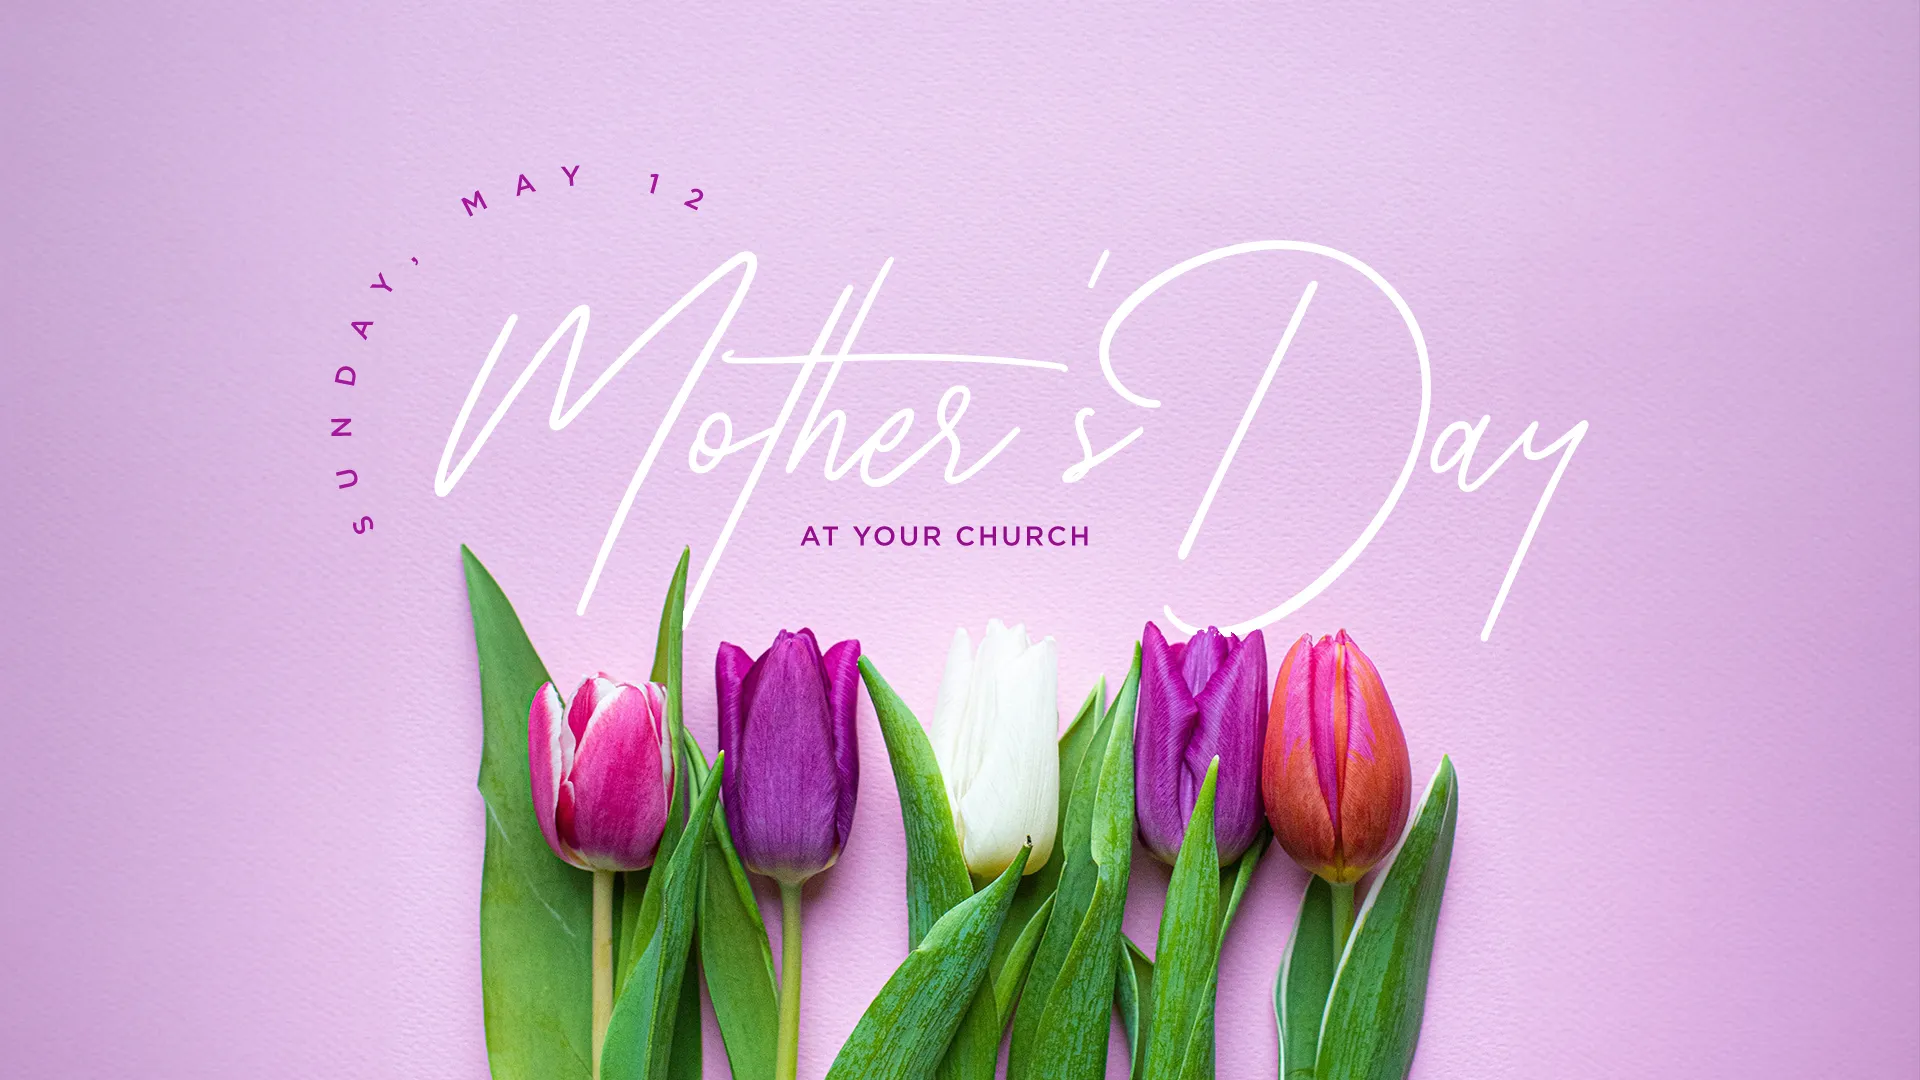 This 'Mother'S Day At Your Church' Graphic Is Beautifully Simple, Featuring Elegant Tulips That Symbolize Care And Love. It'S The Perfect Visual Element For Your Church'S Mother'S Day Celebrations, Conveying Warmth And Appreciation For All Mothers.